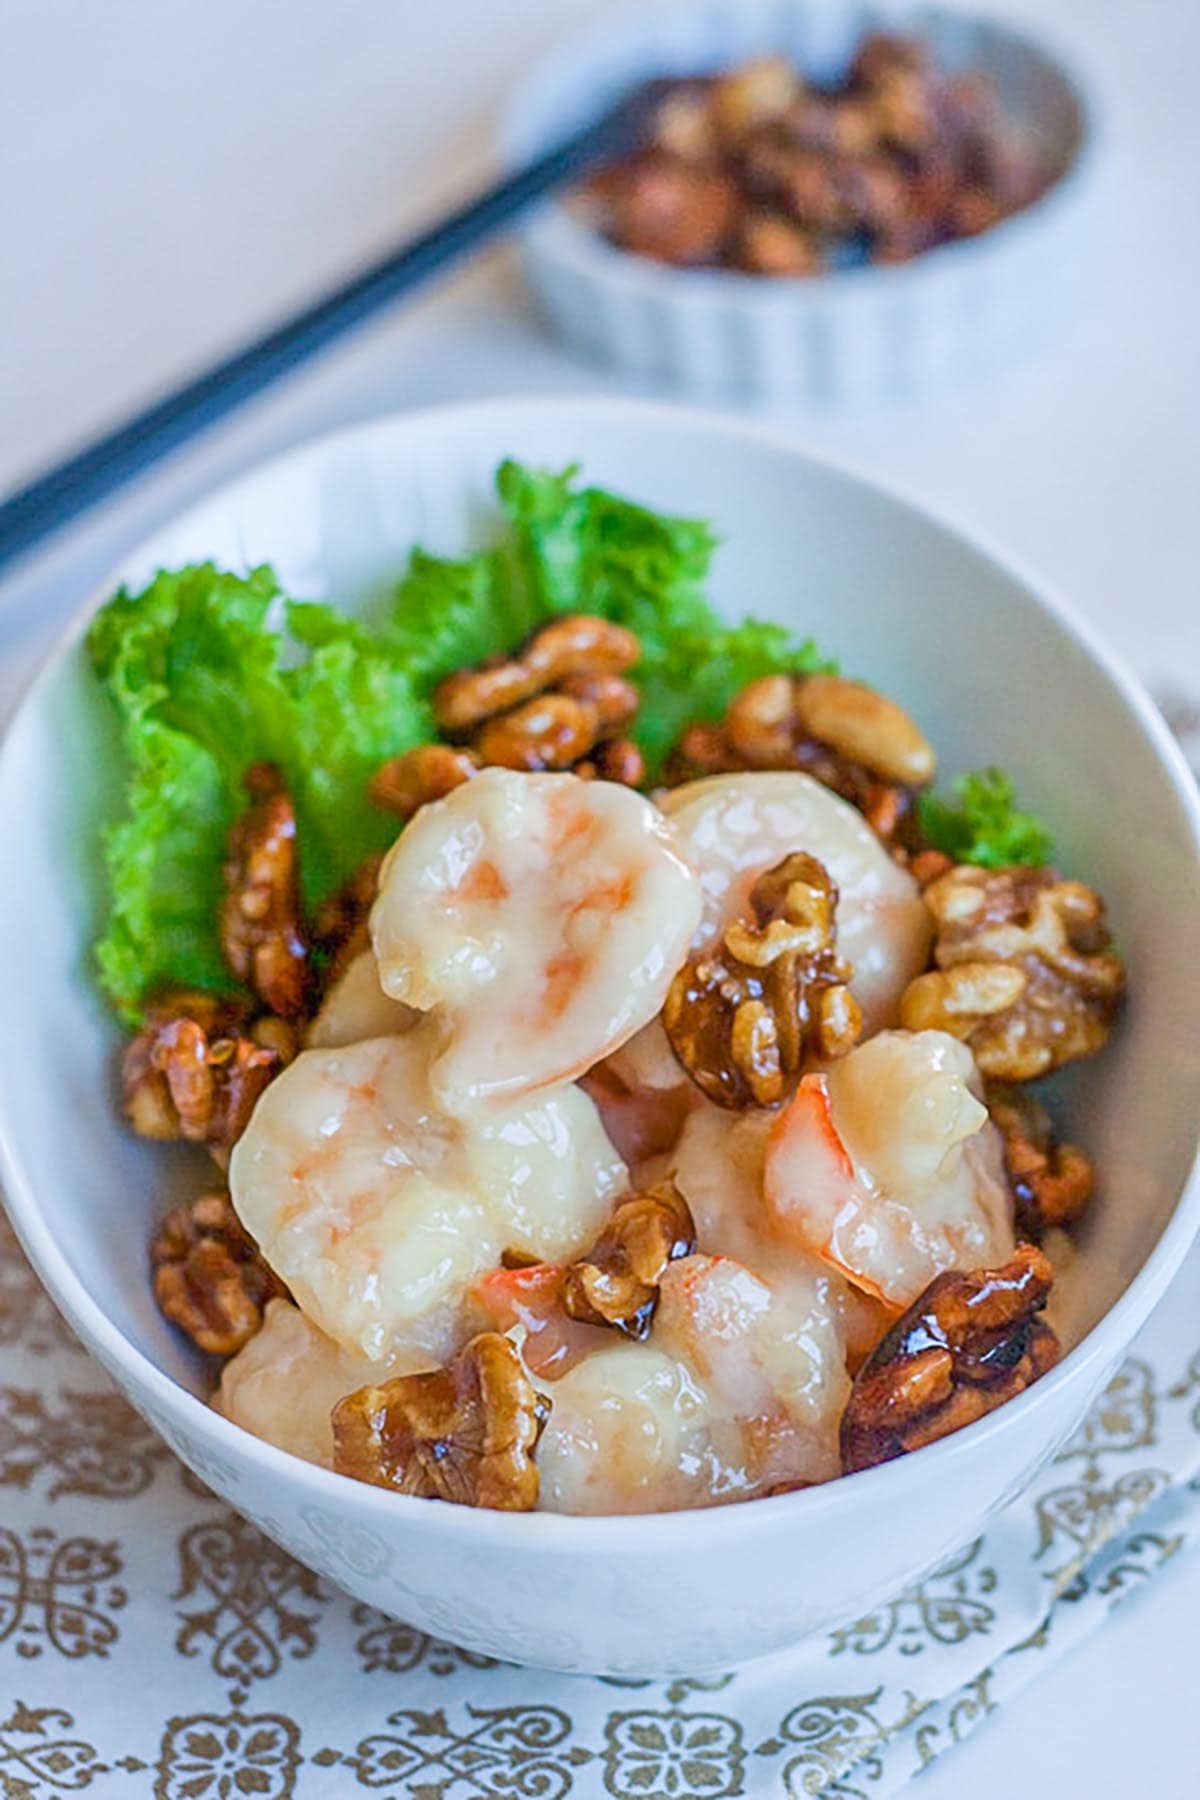 Honey walnut shrimp with sweet mayo sauce. Learn how to make it with this quick and easy recipe. So delicious, a must try | rasamalaysia.com